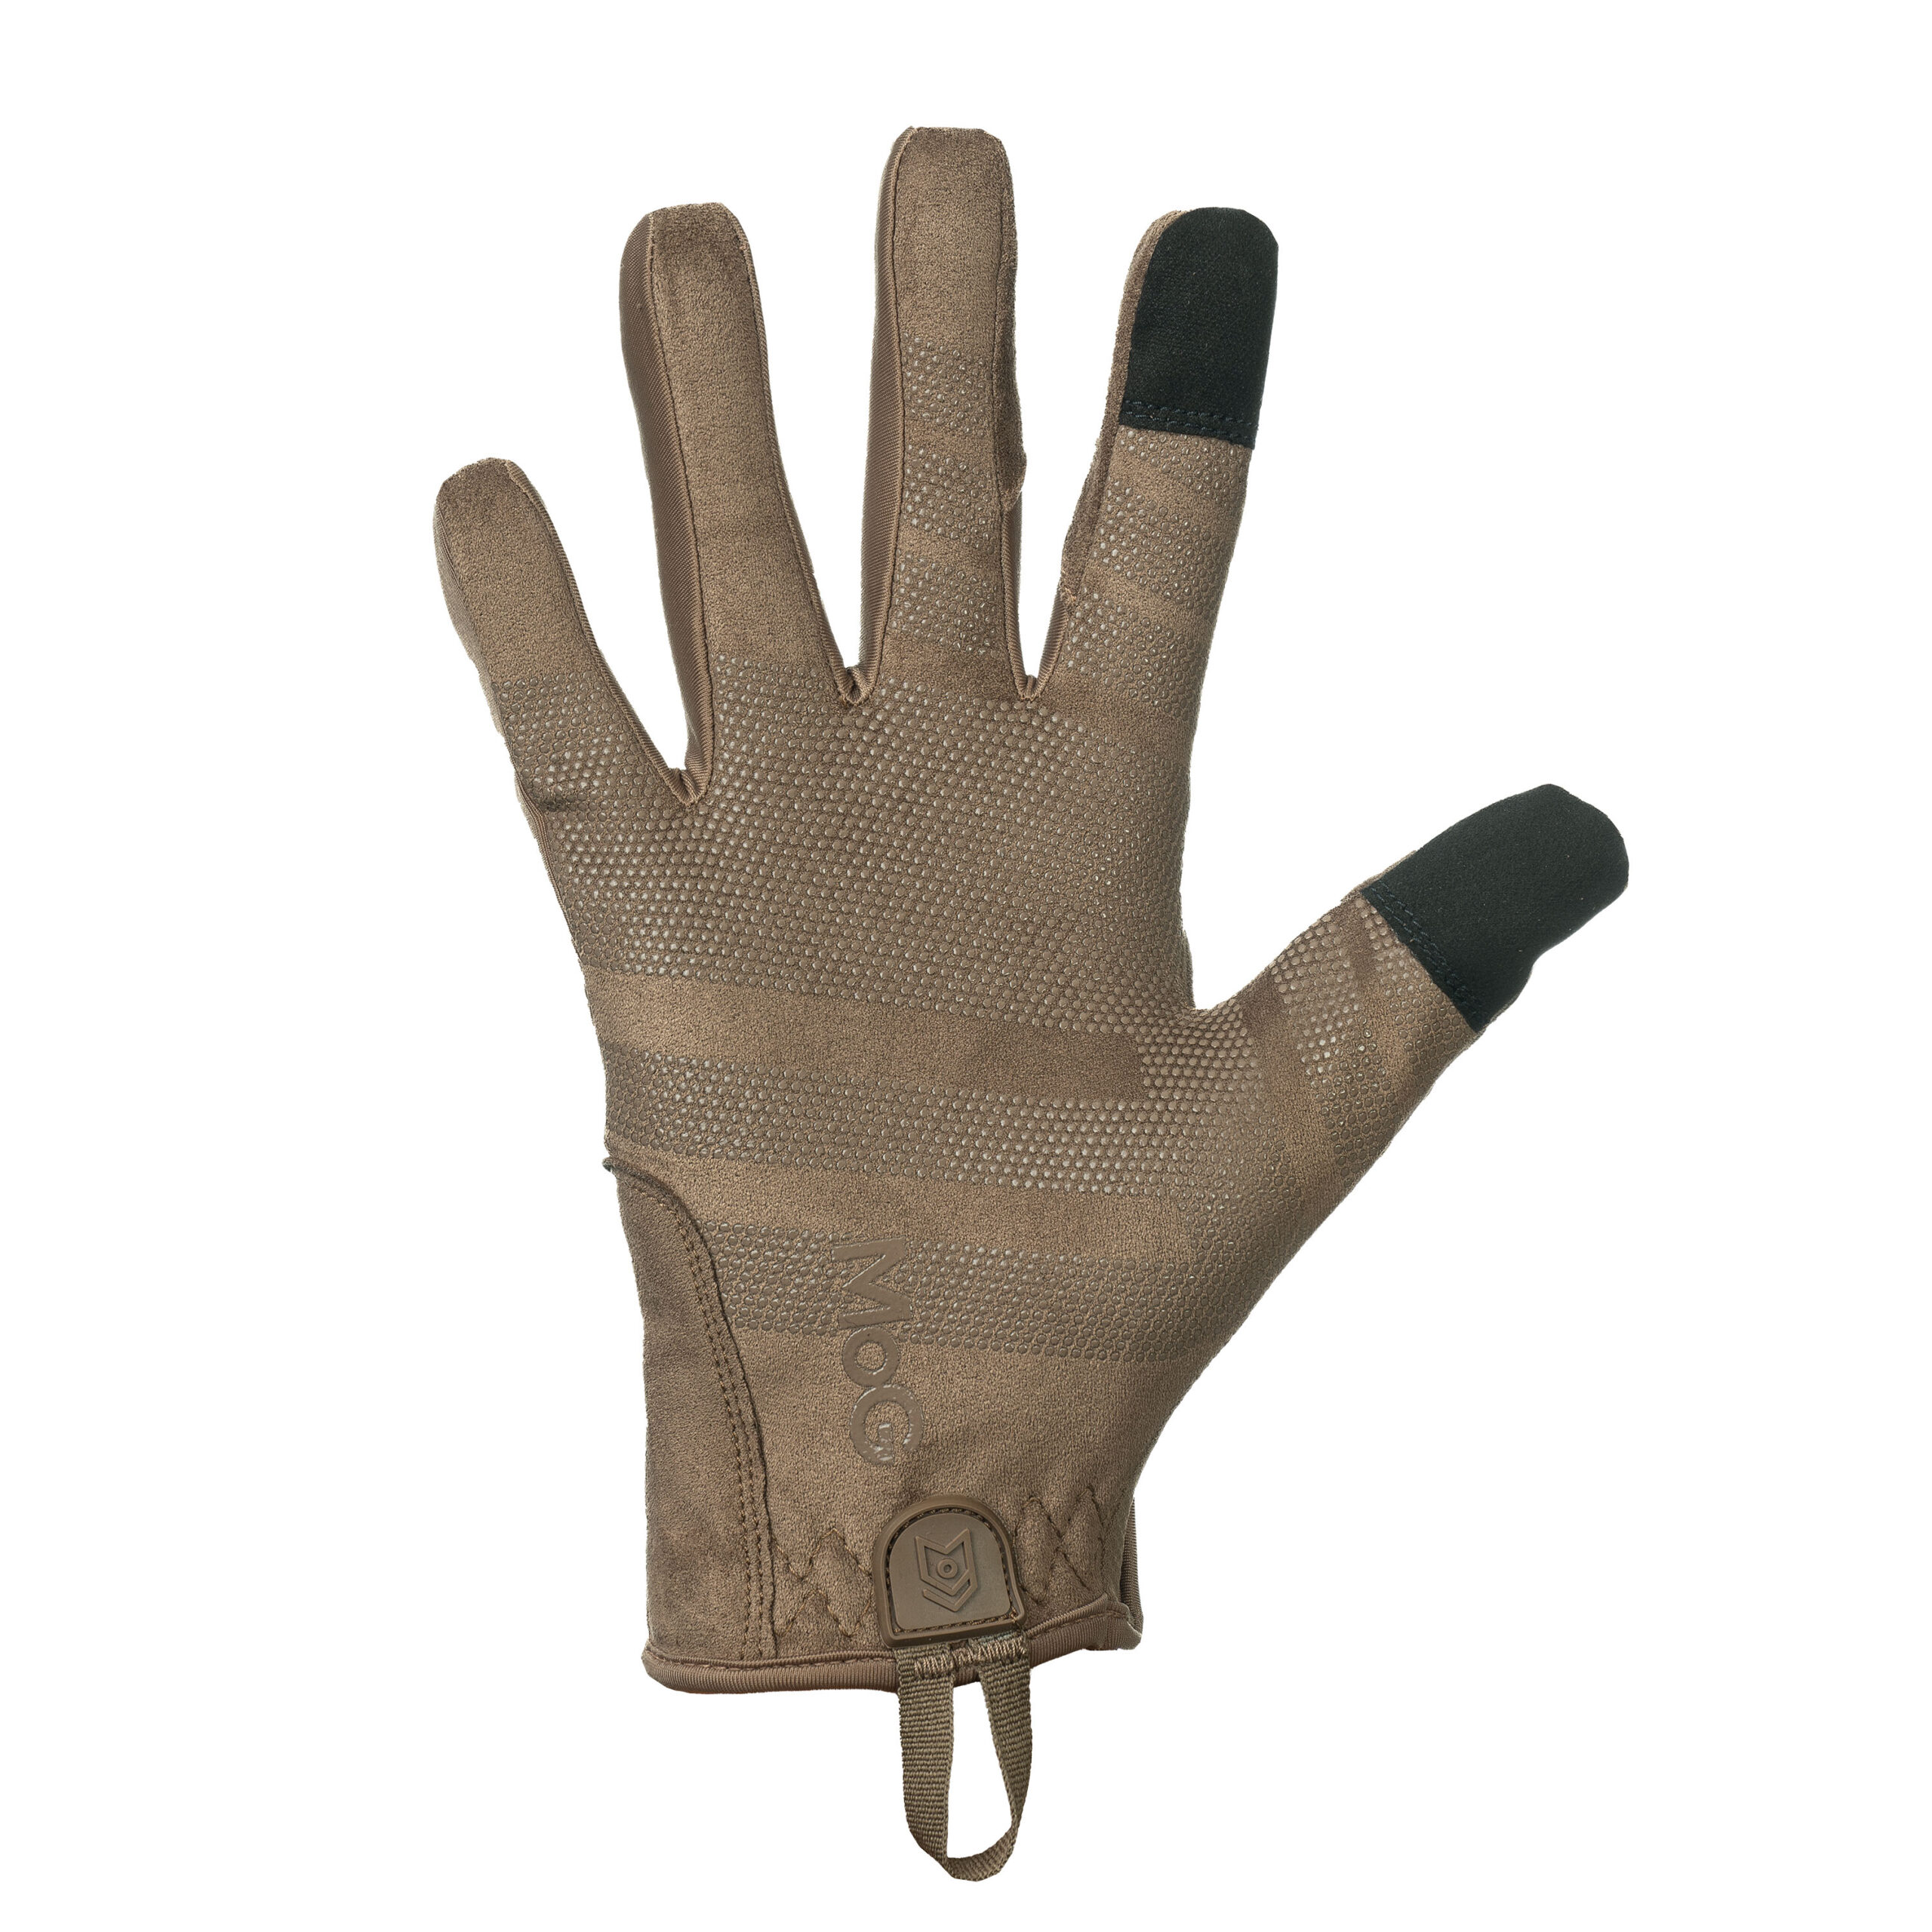 MoG Target Light Duty Coyote Brown Tactical gloves POH